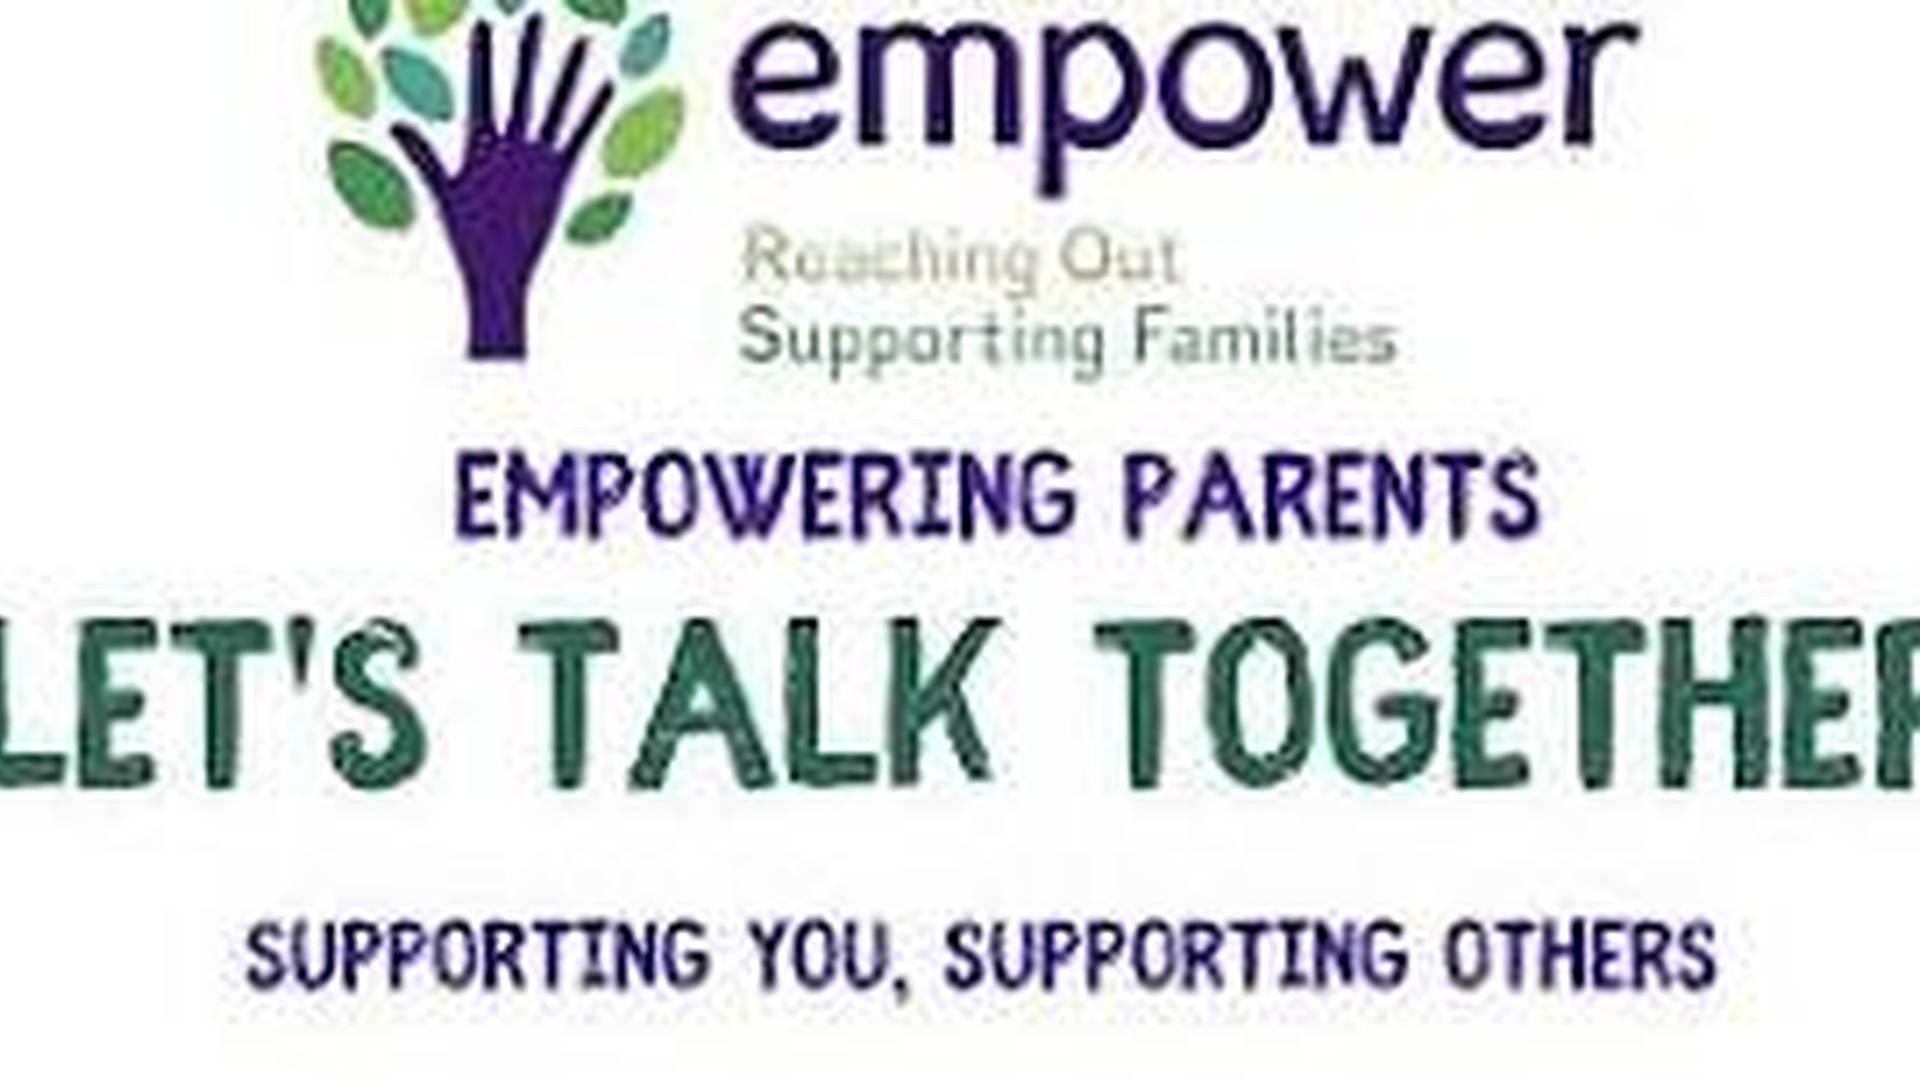 Empowering Parent's - Let's Talk Together photo